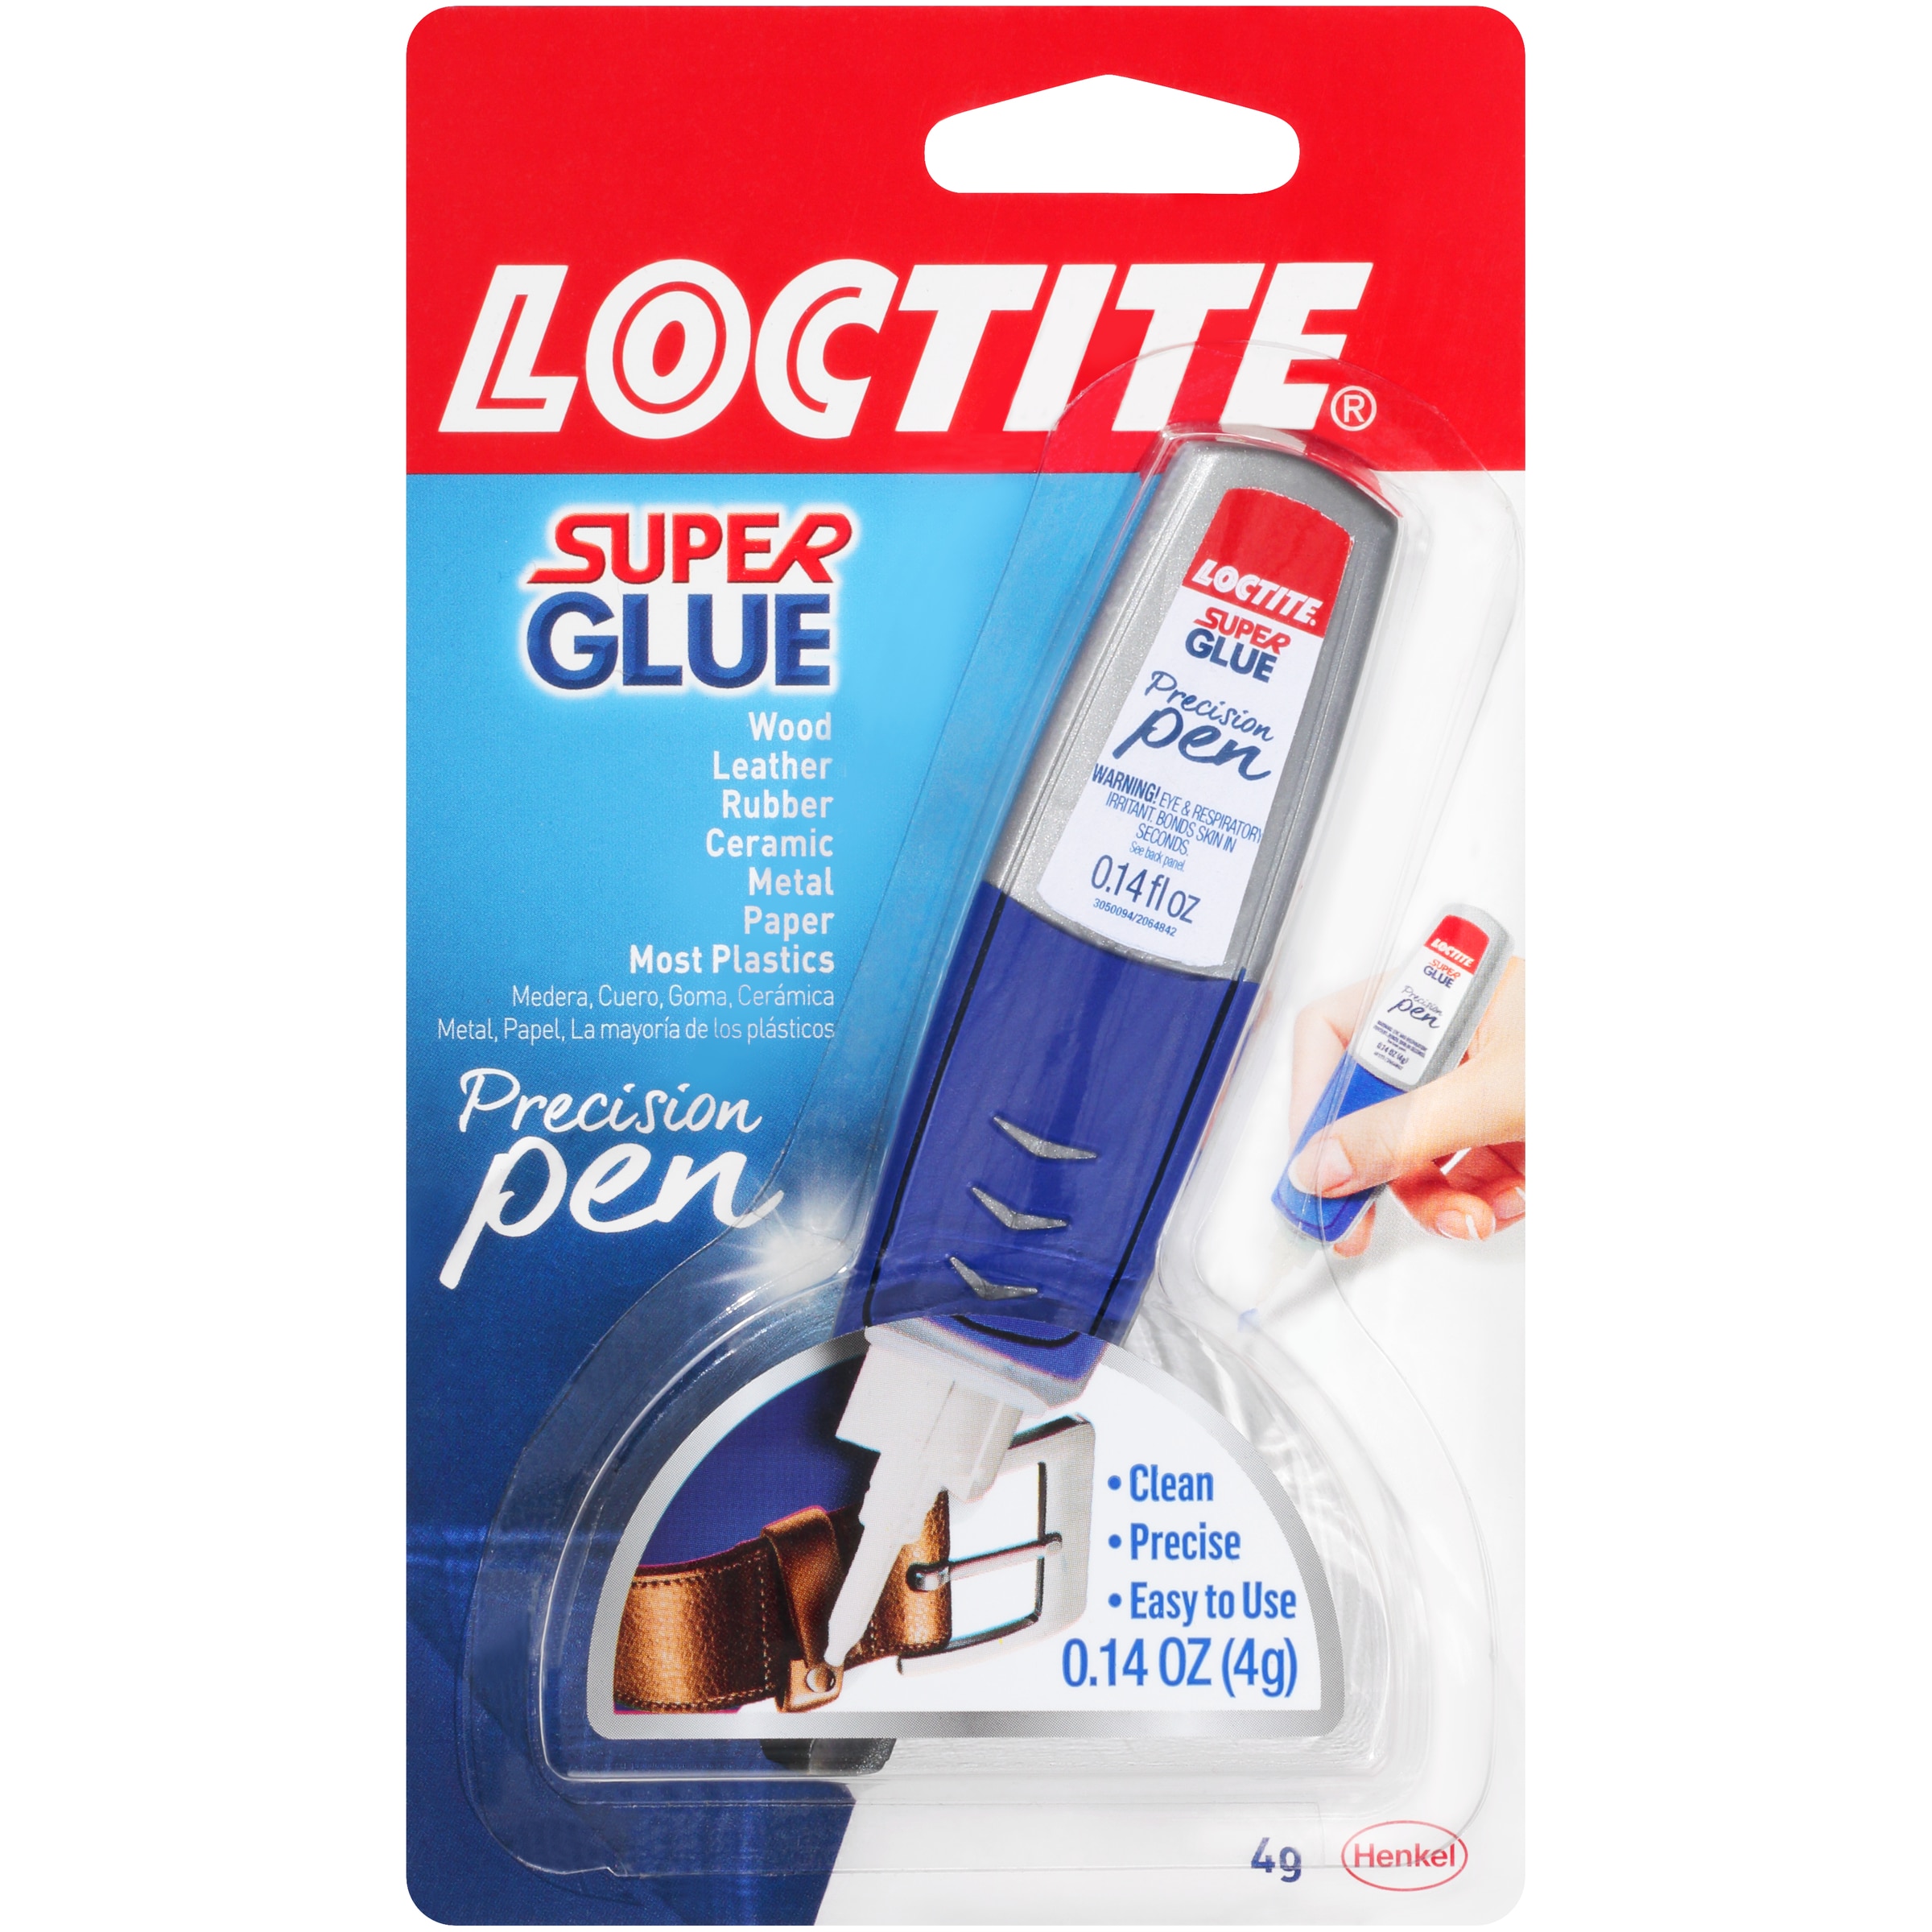 LOCTITE 3020 - glue for sealing 400ml, 26,70 €